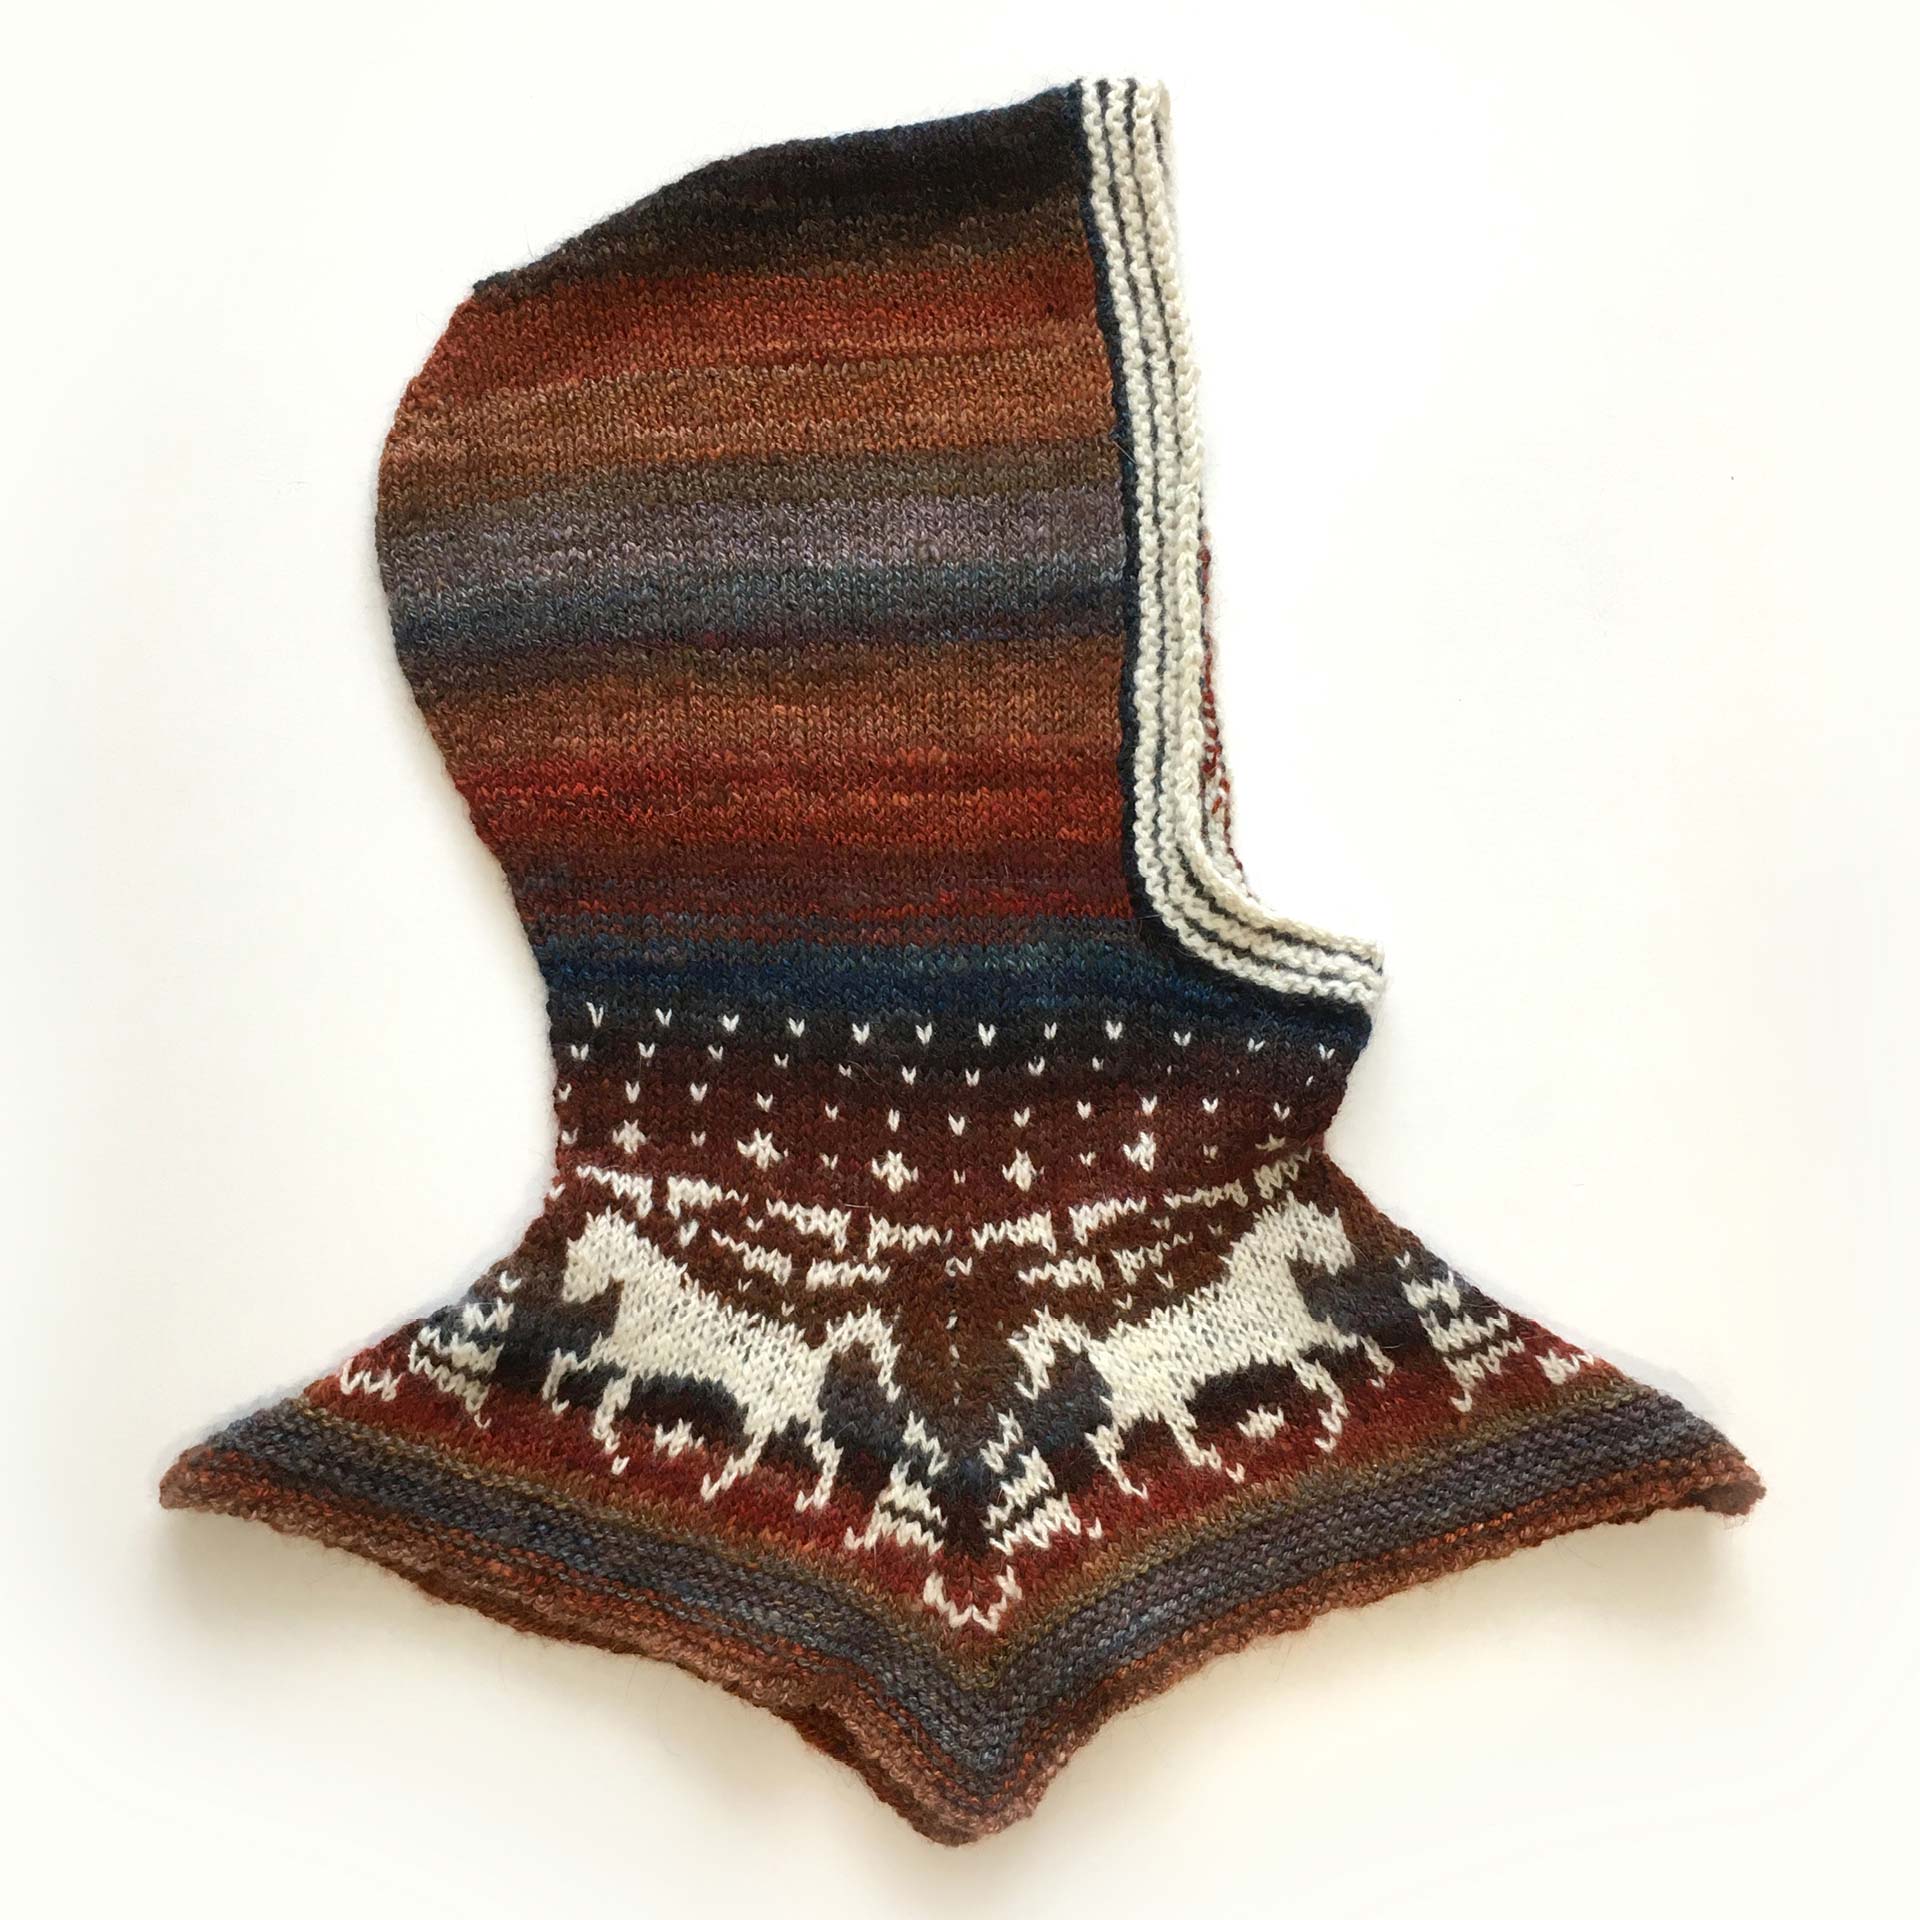 2021-Spin-Off-Cowl-Along-Paivi-Eerola